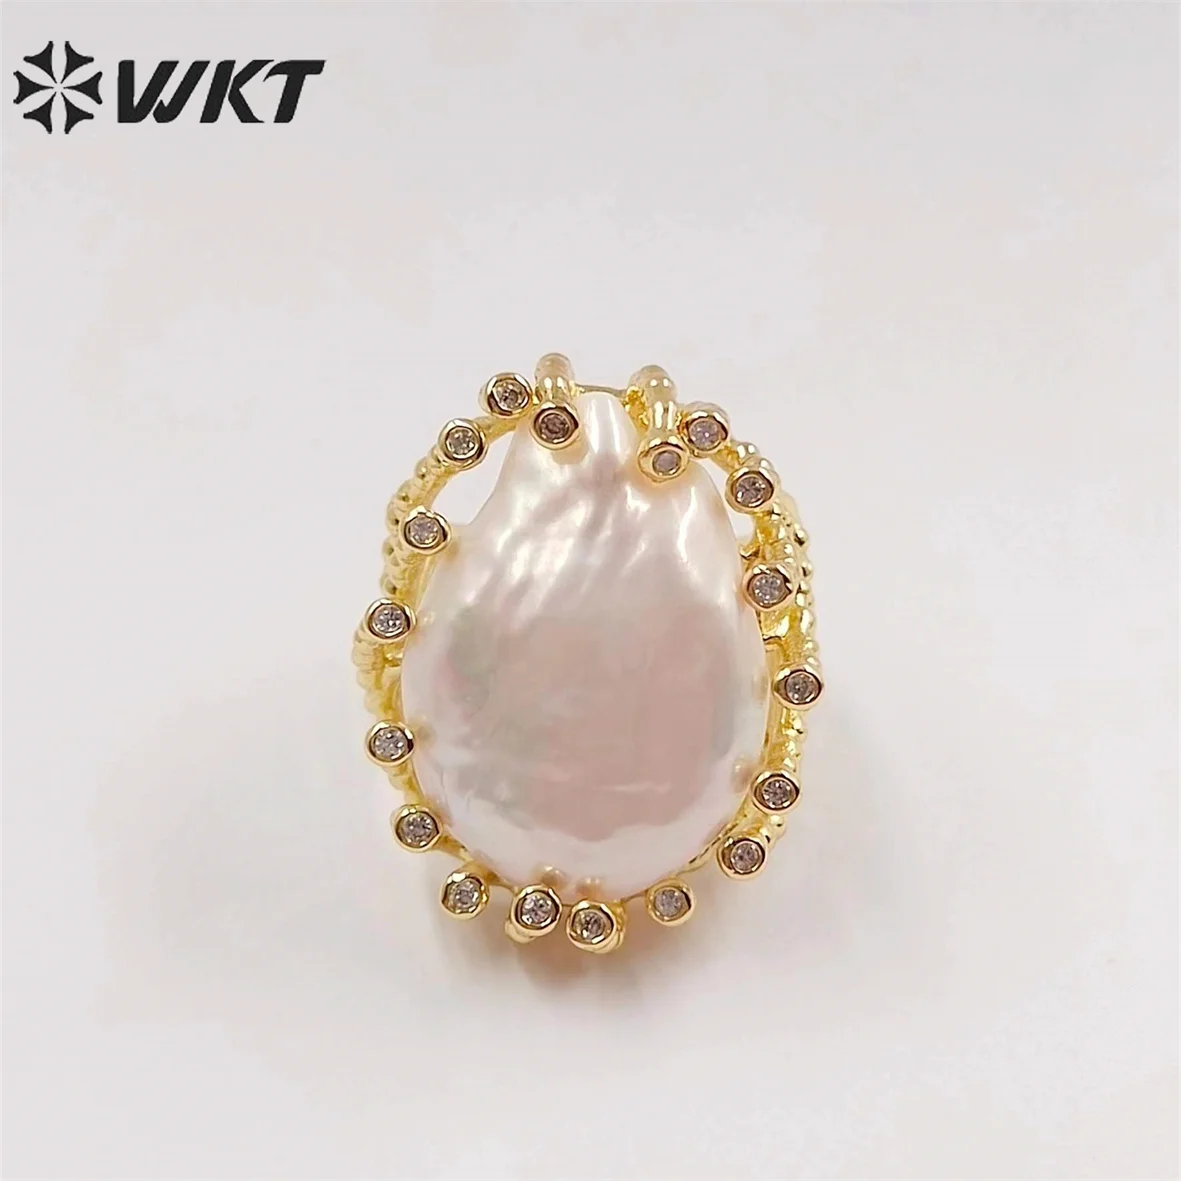 WT-MPR048  WKT 2023 Exquisite Natural Pearl Ring Women Gift Hot Style Beautiful - £29.59 GBP